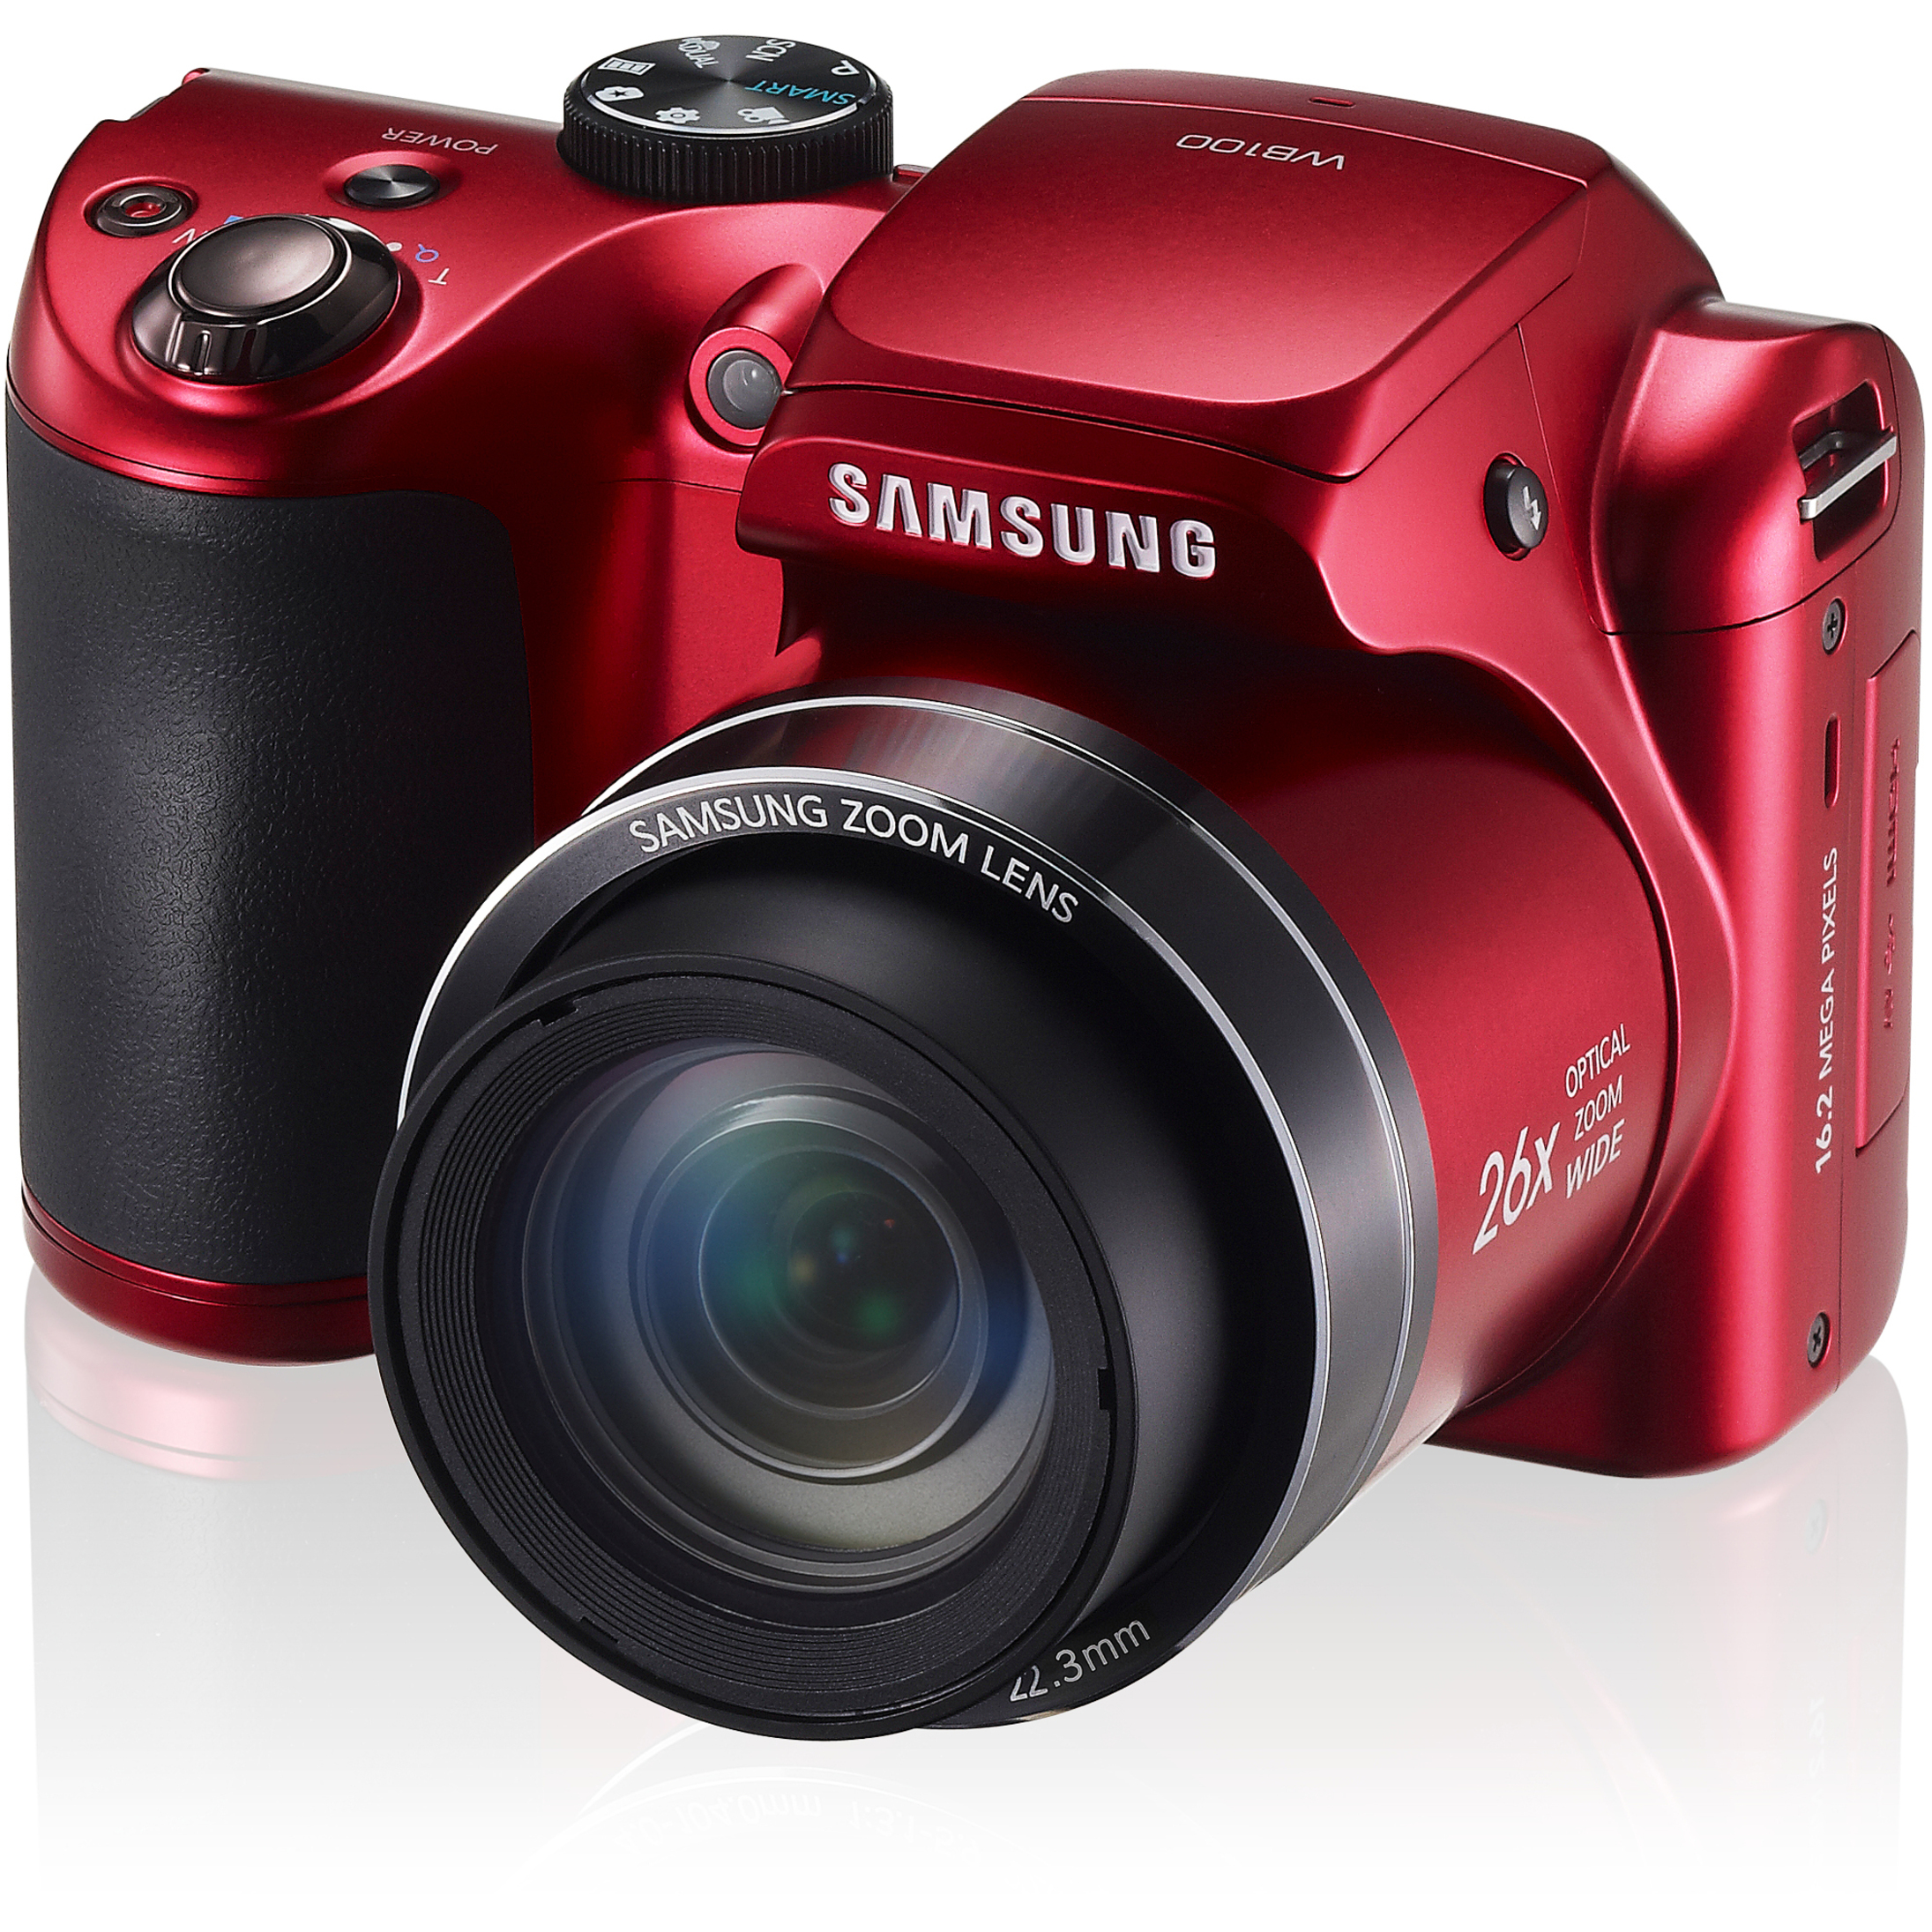 Samsung WB100 16.2 Megapixel Compact Camera, Red - image 2 of 6